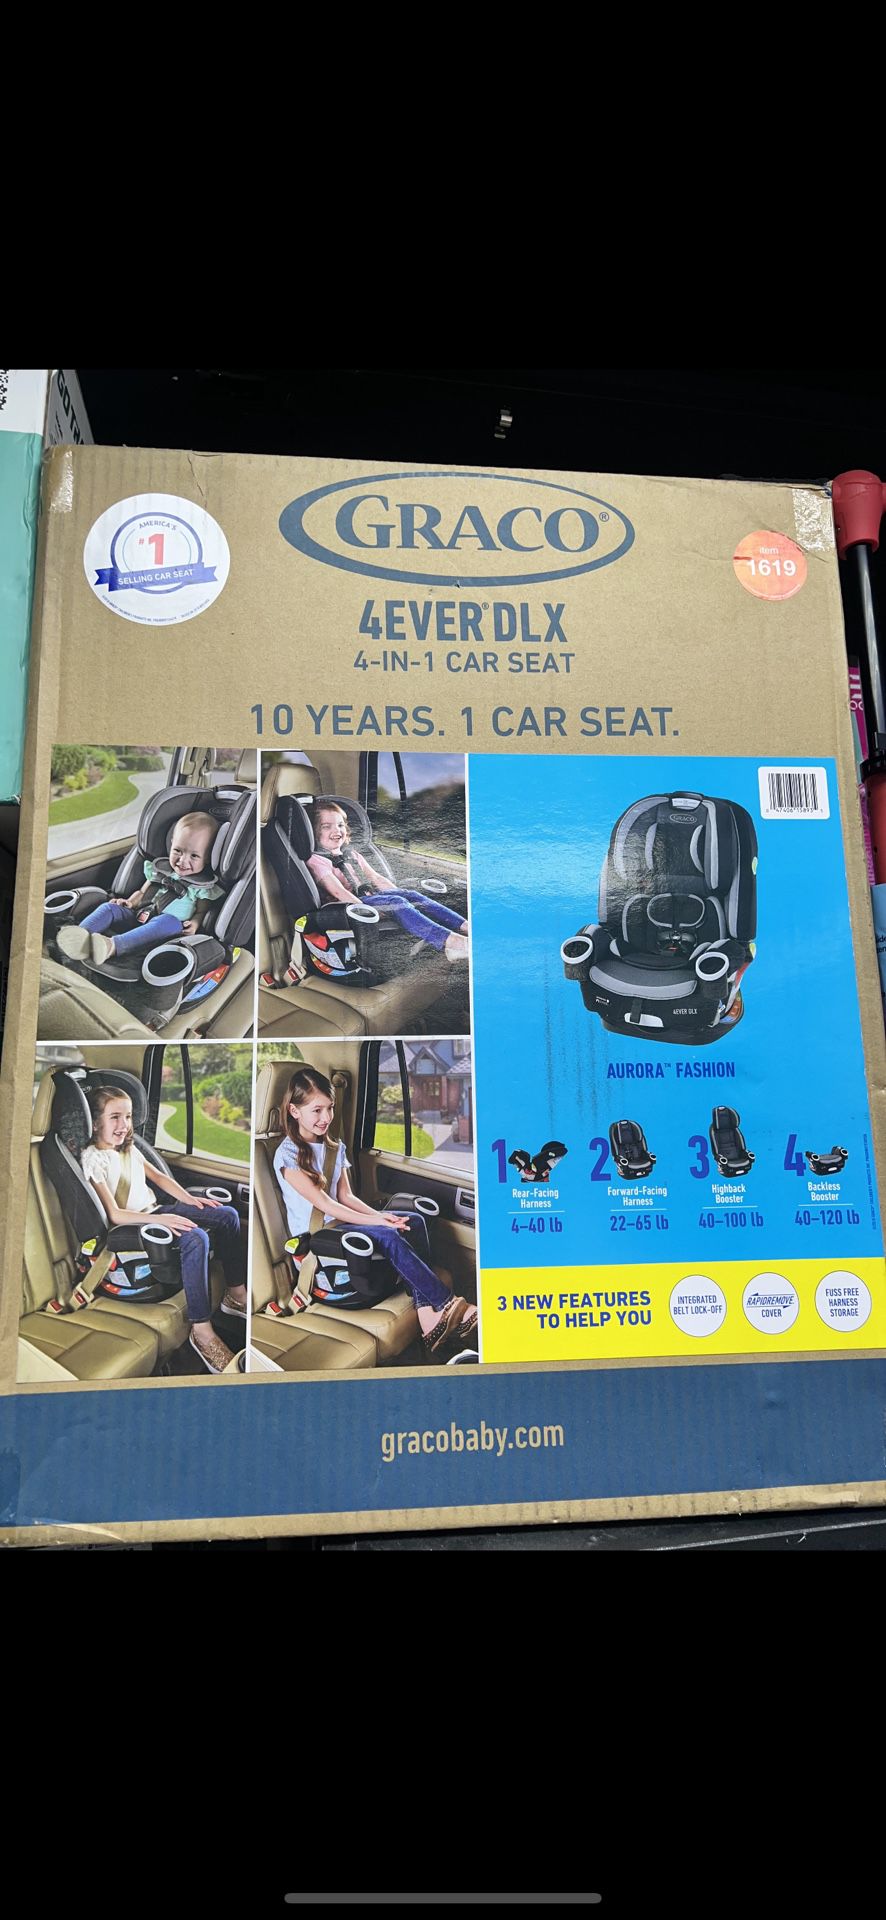 GRACO® 1619 4EVERDLX 4-IN-1 CAR SEAT 10 YEARS. 1 CAR SEAT.